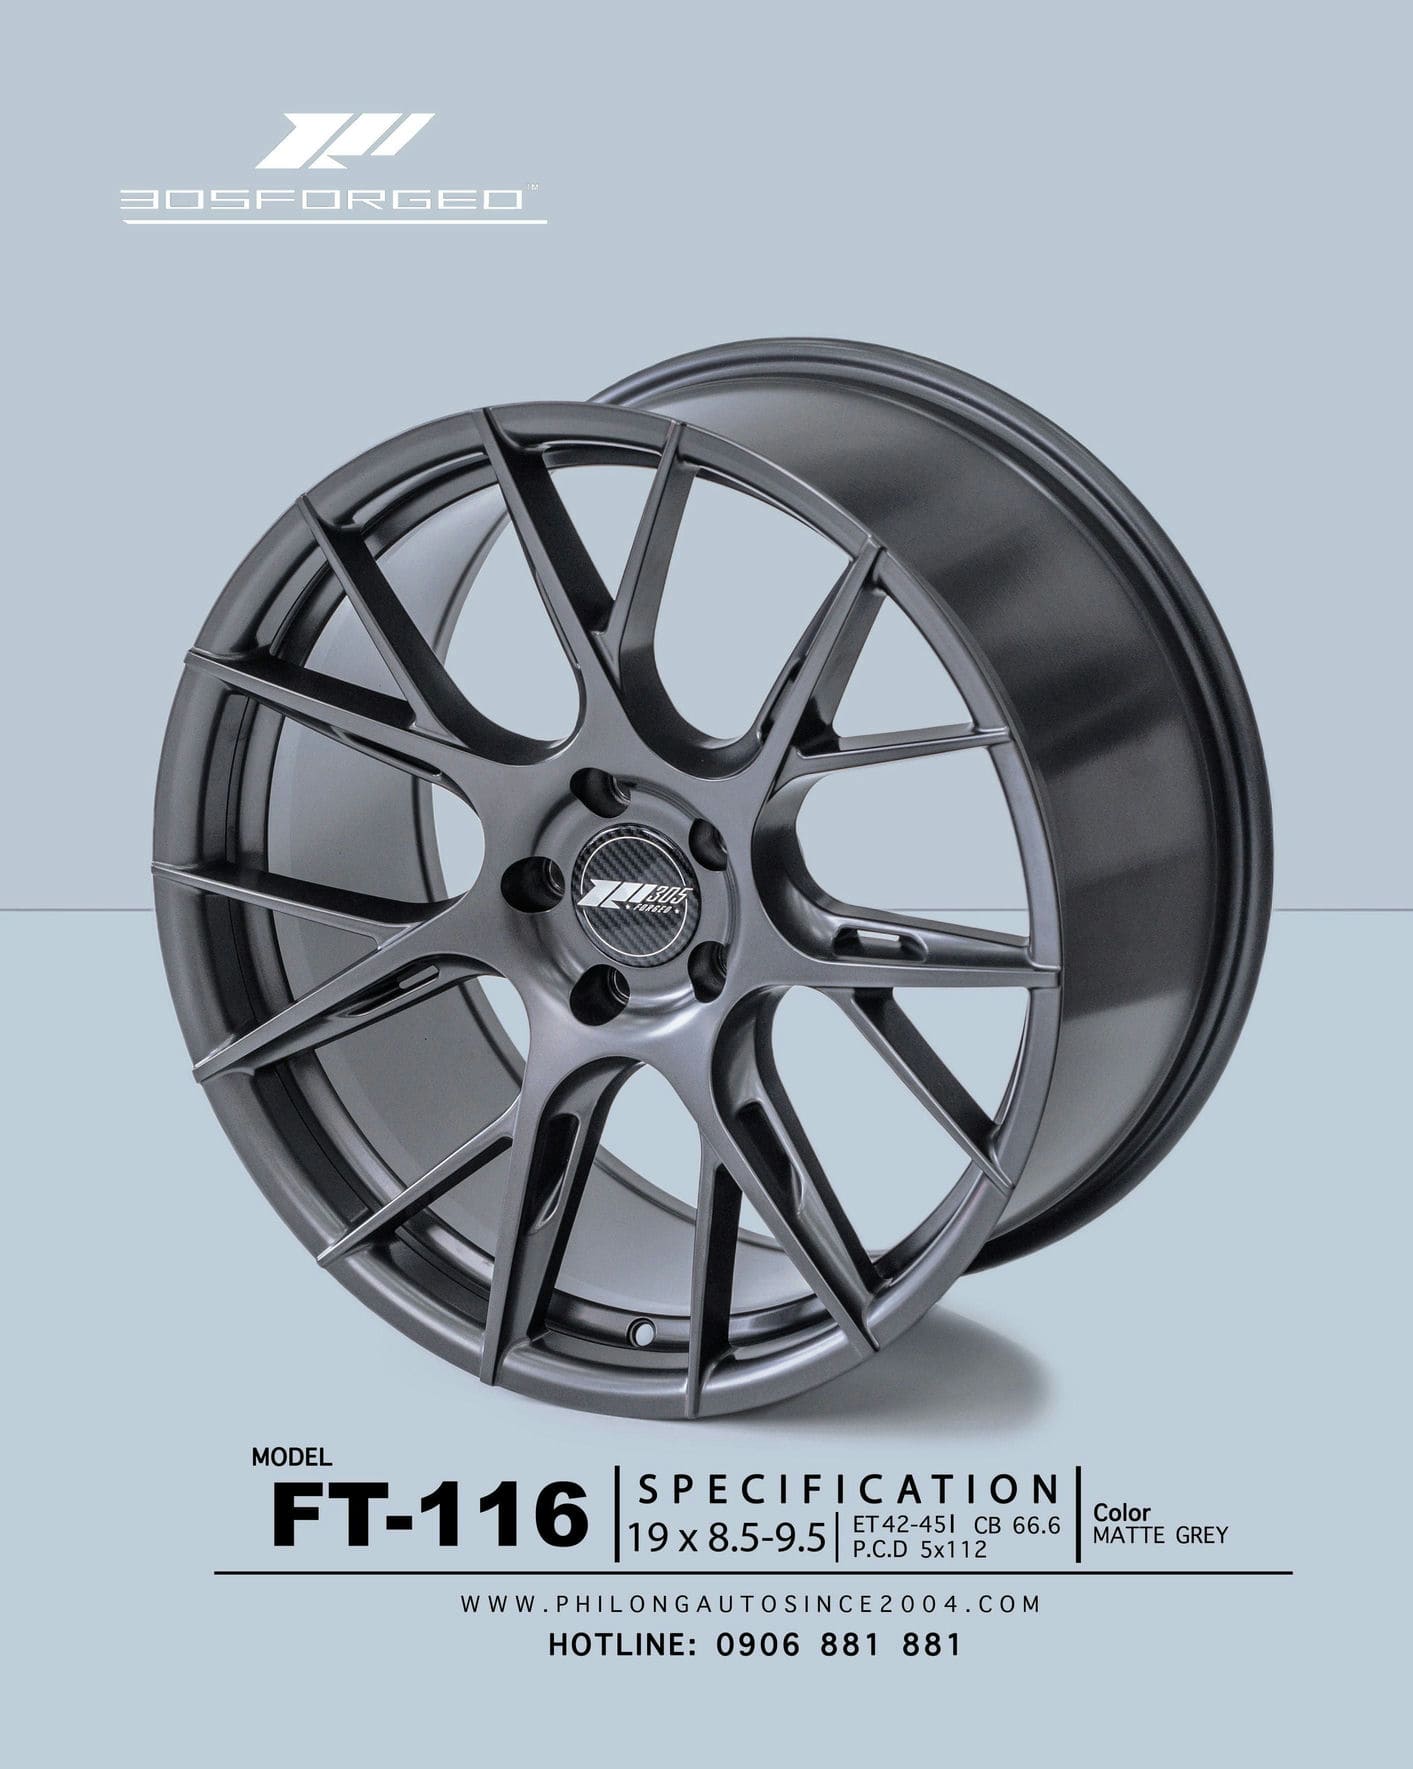 305 FORGED FT 116 (4)